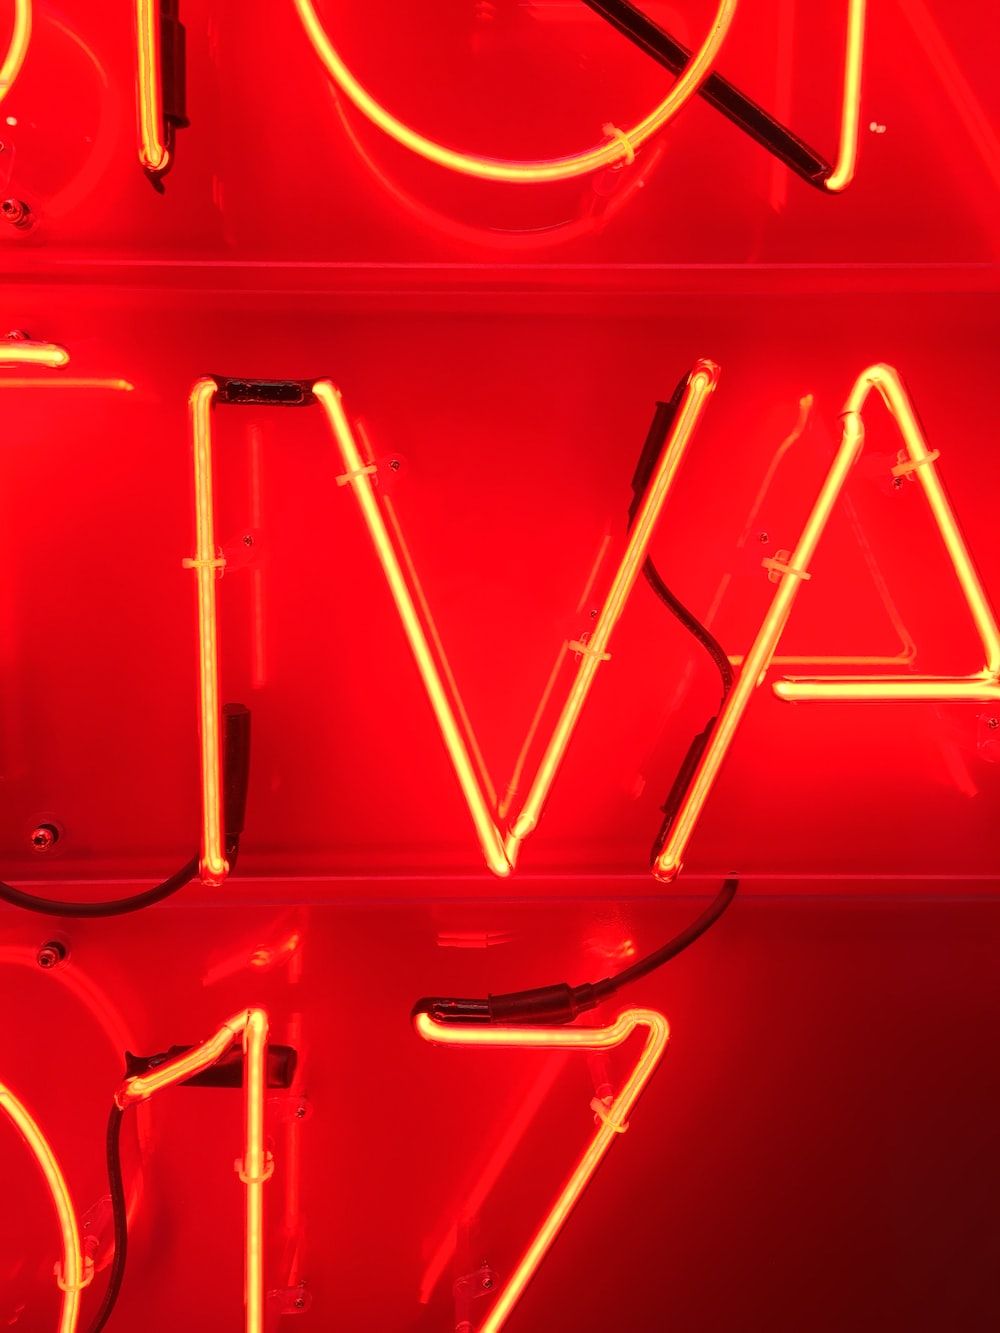 red and white neon light signage photo